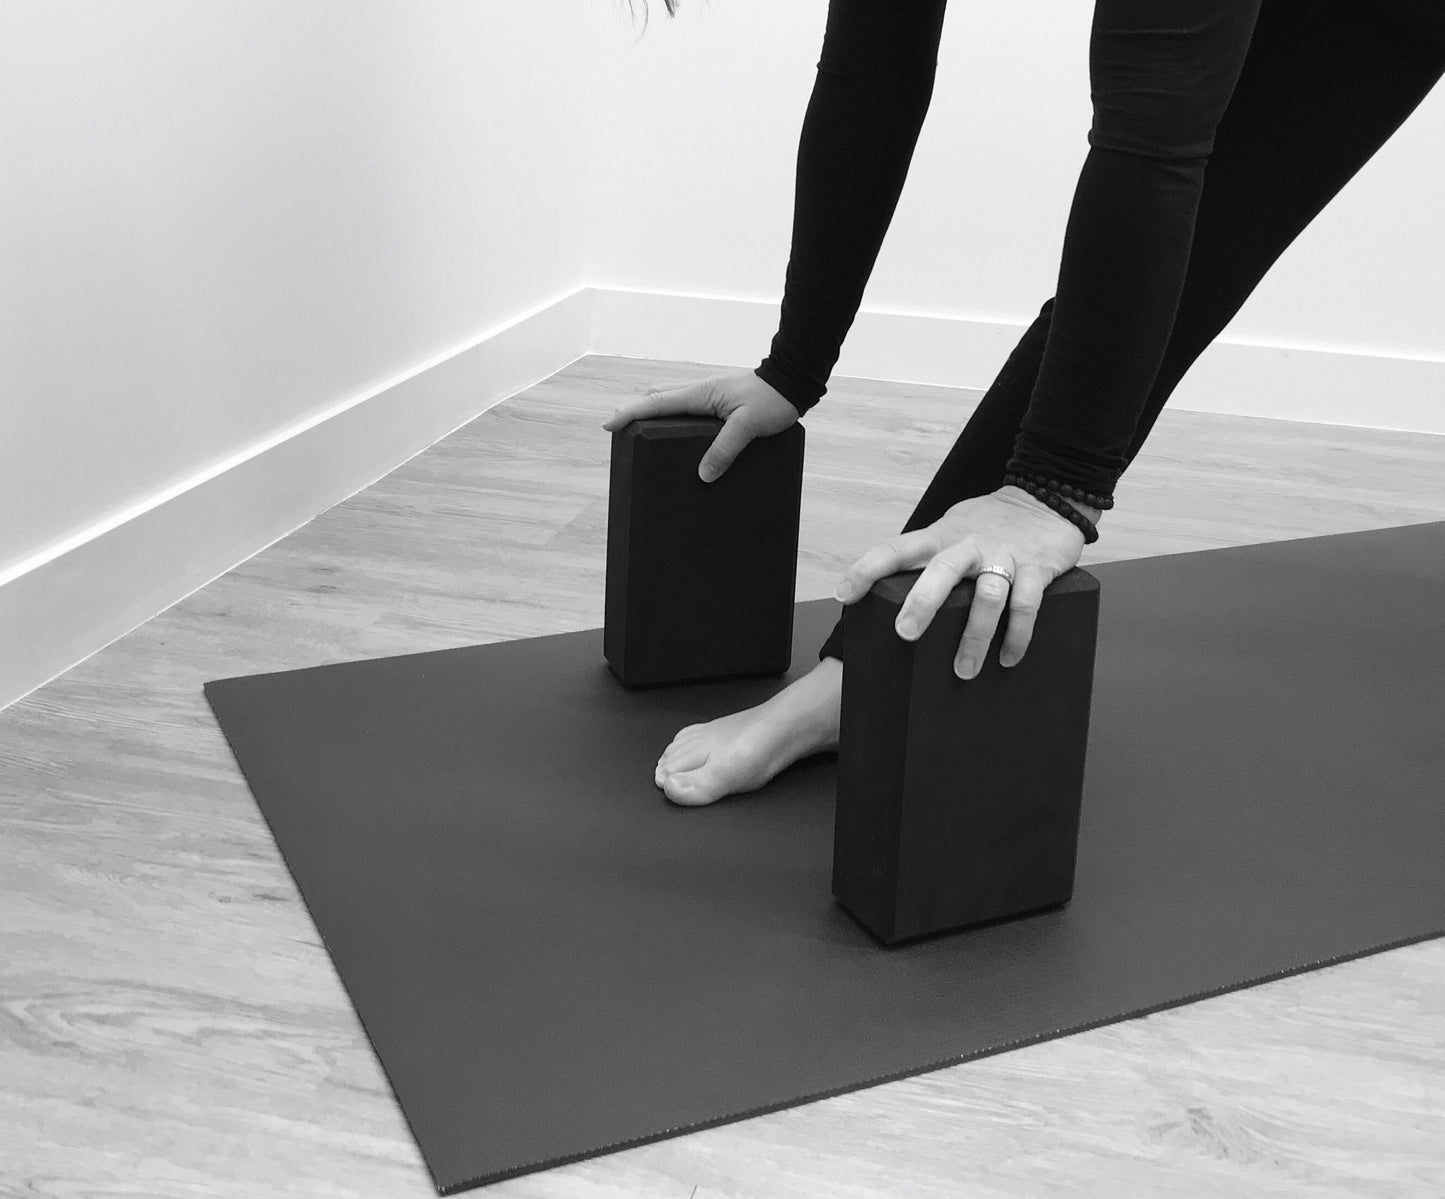 Foam Yoga Block Set to support and align your yoga postures. Light weight high density foam to provide comfort and solid support.